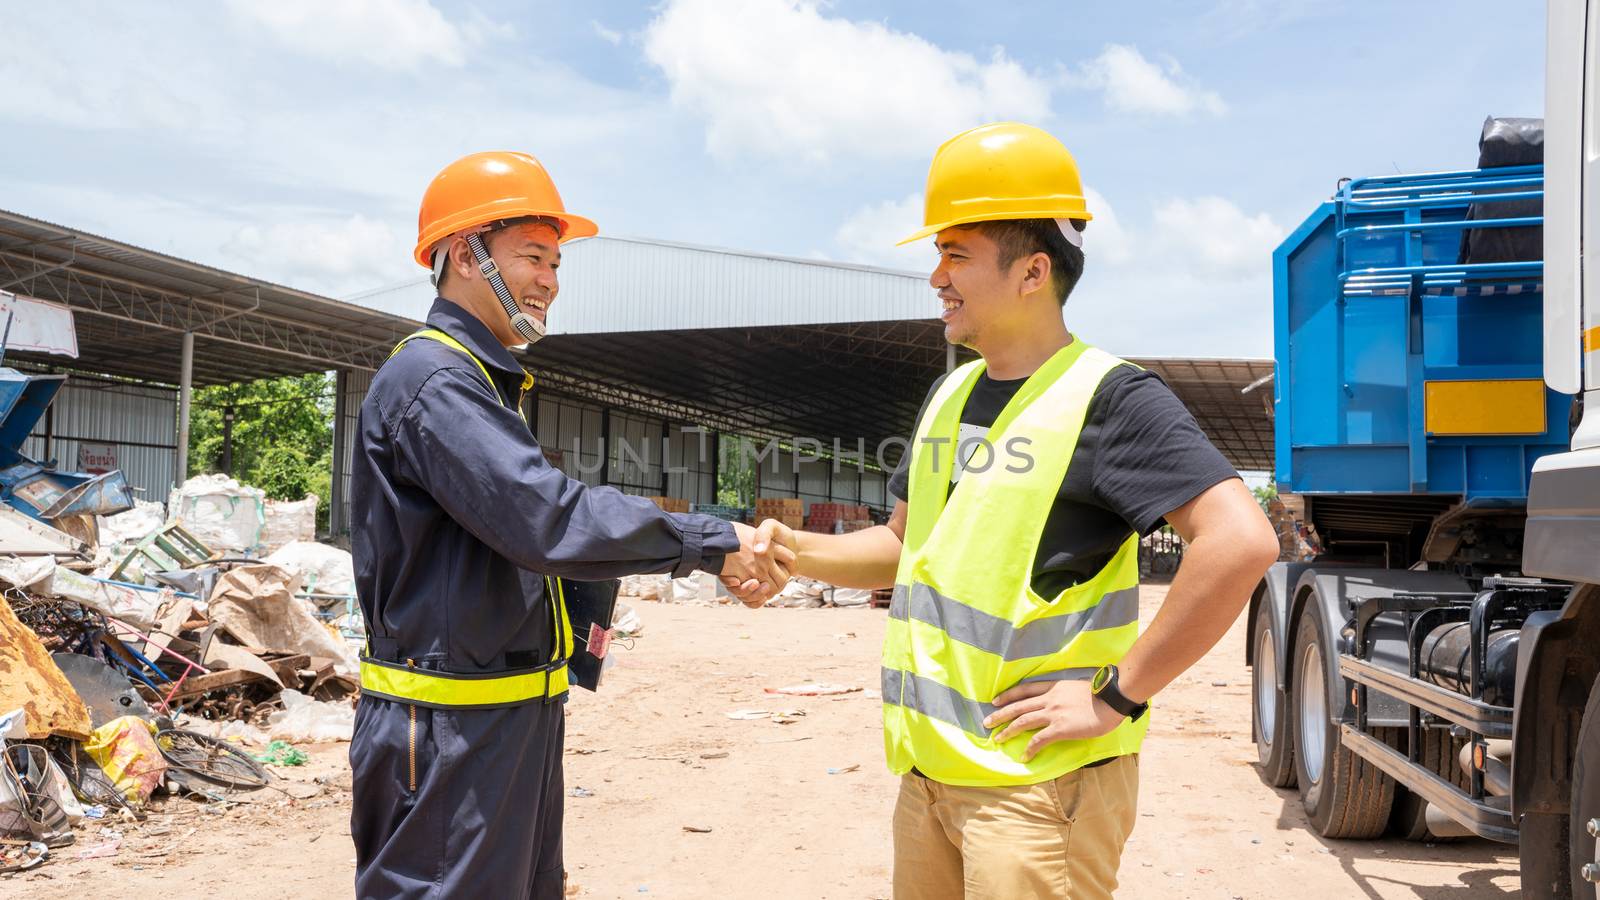 Foreman with safety hats in the parking and shaking hands of two happy young builders while standing at the waste recycling plant.